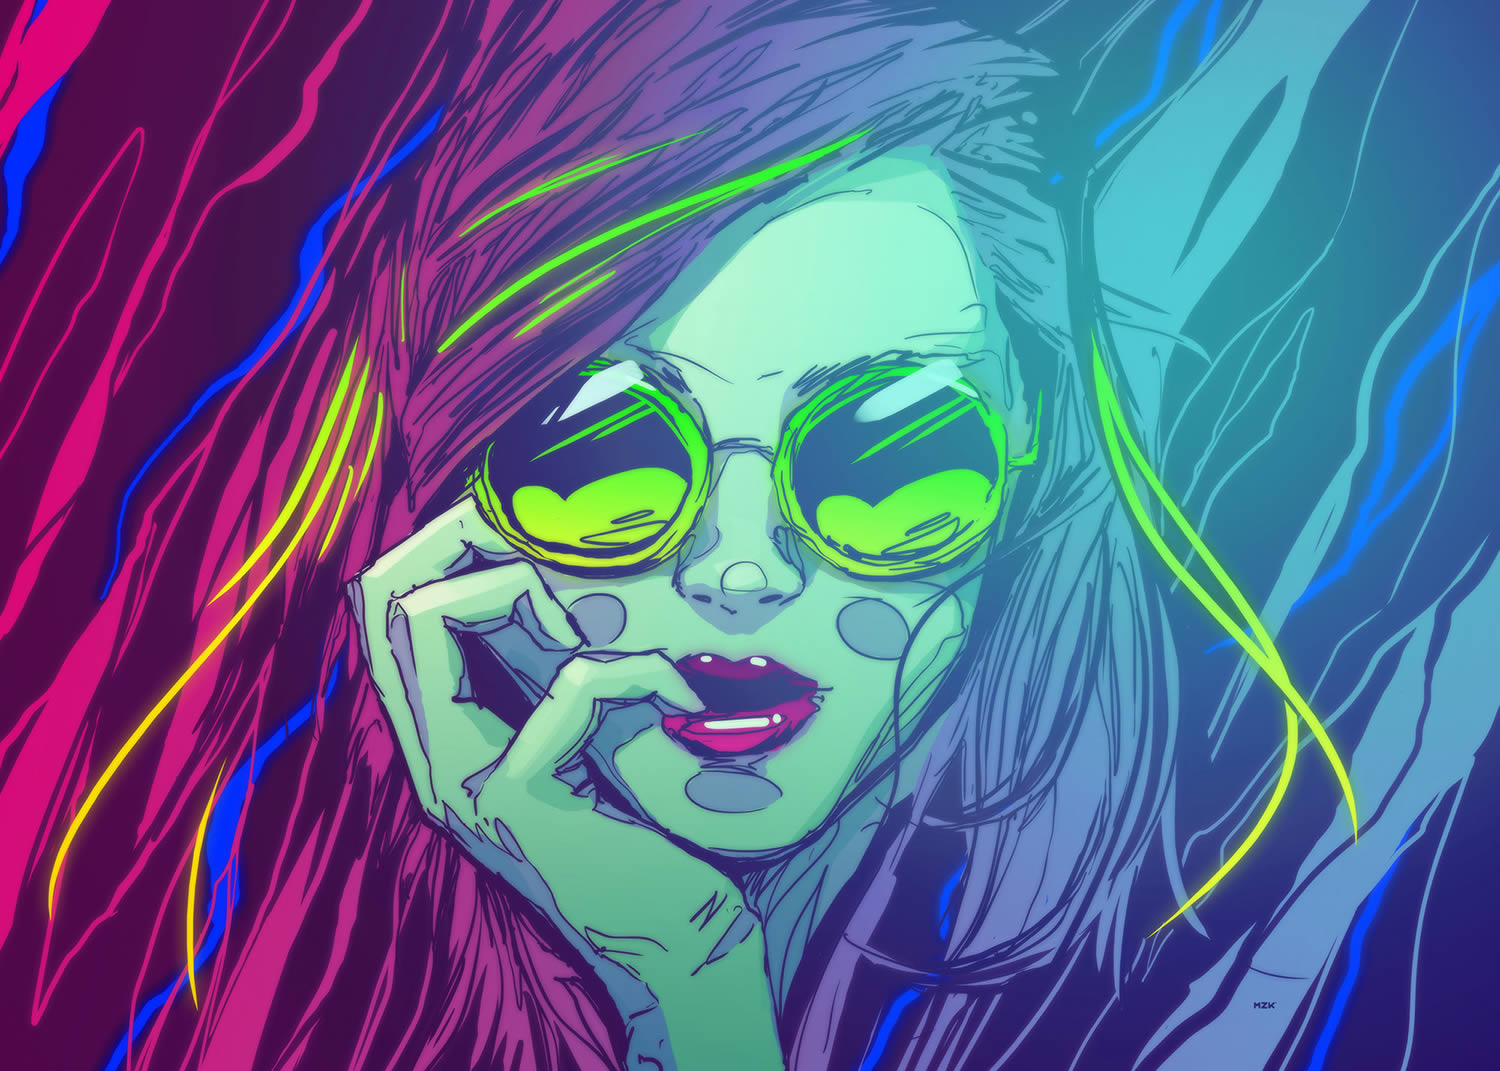 neon girl with sunglasses, "GoGuide x MZK" by Kaloian Toshev.